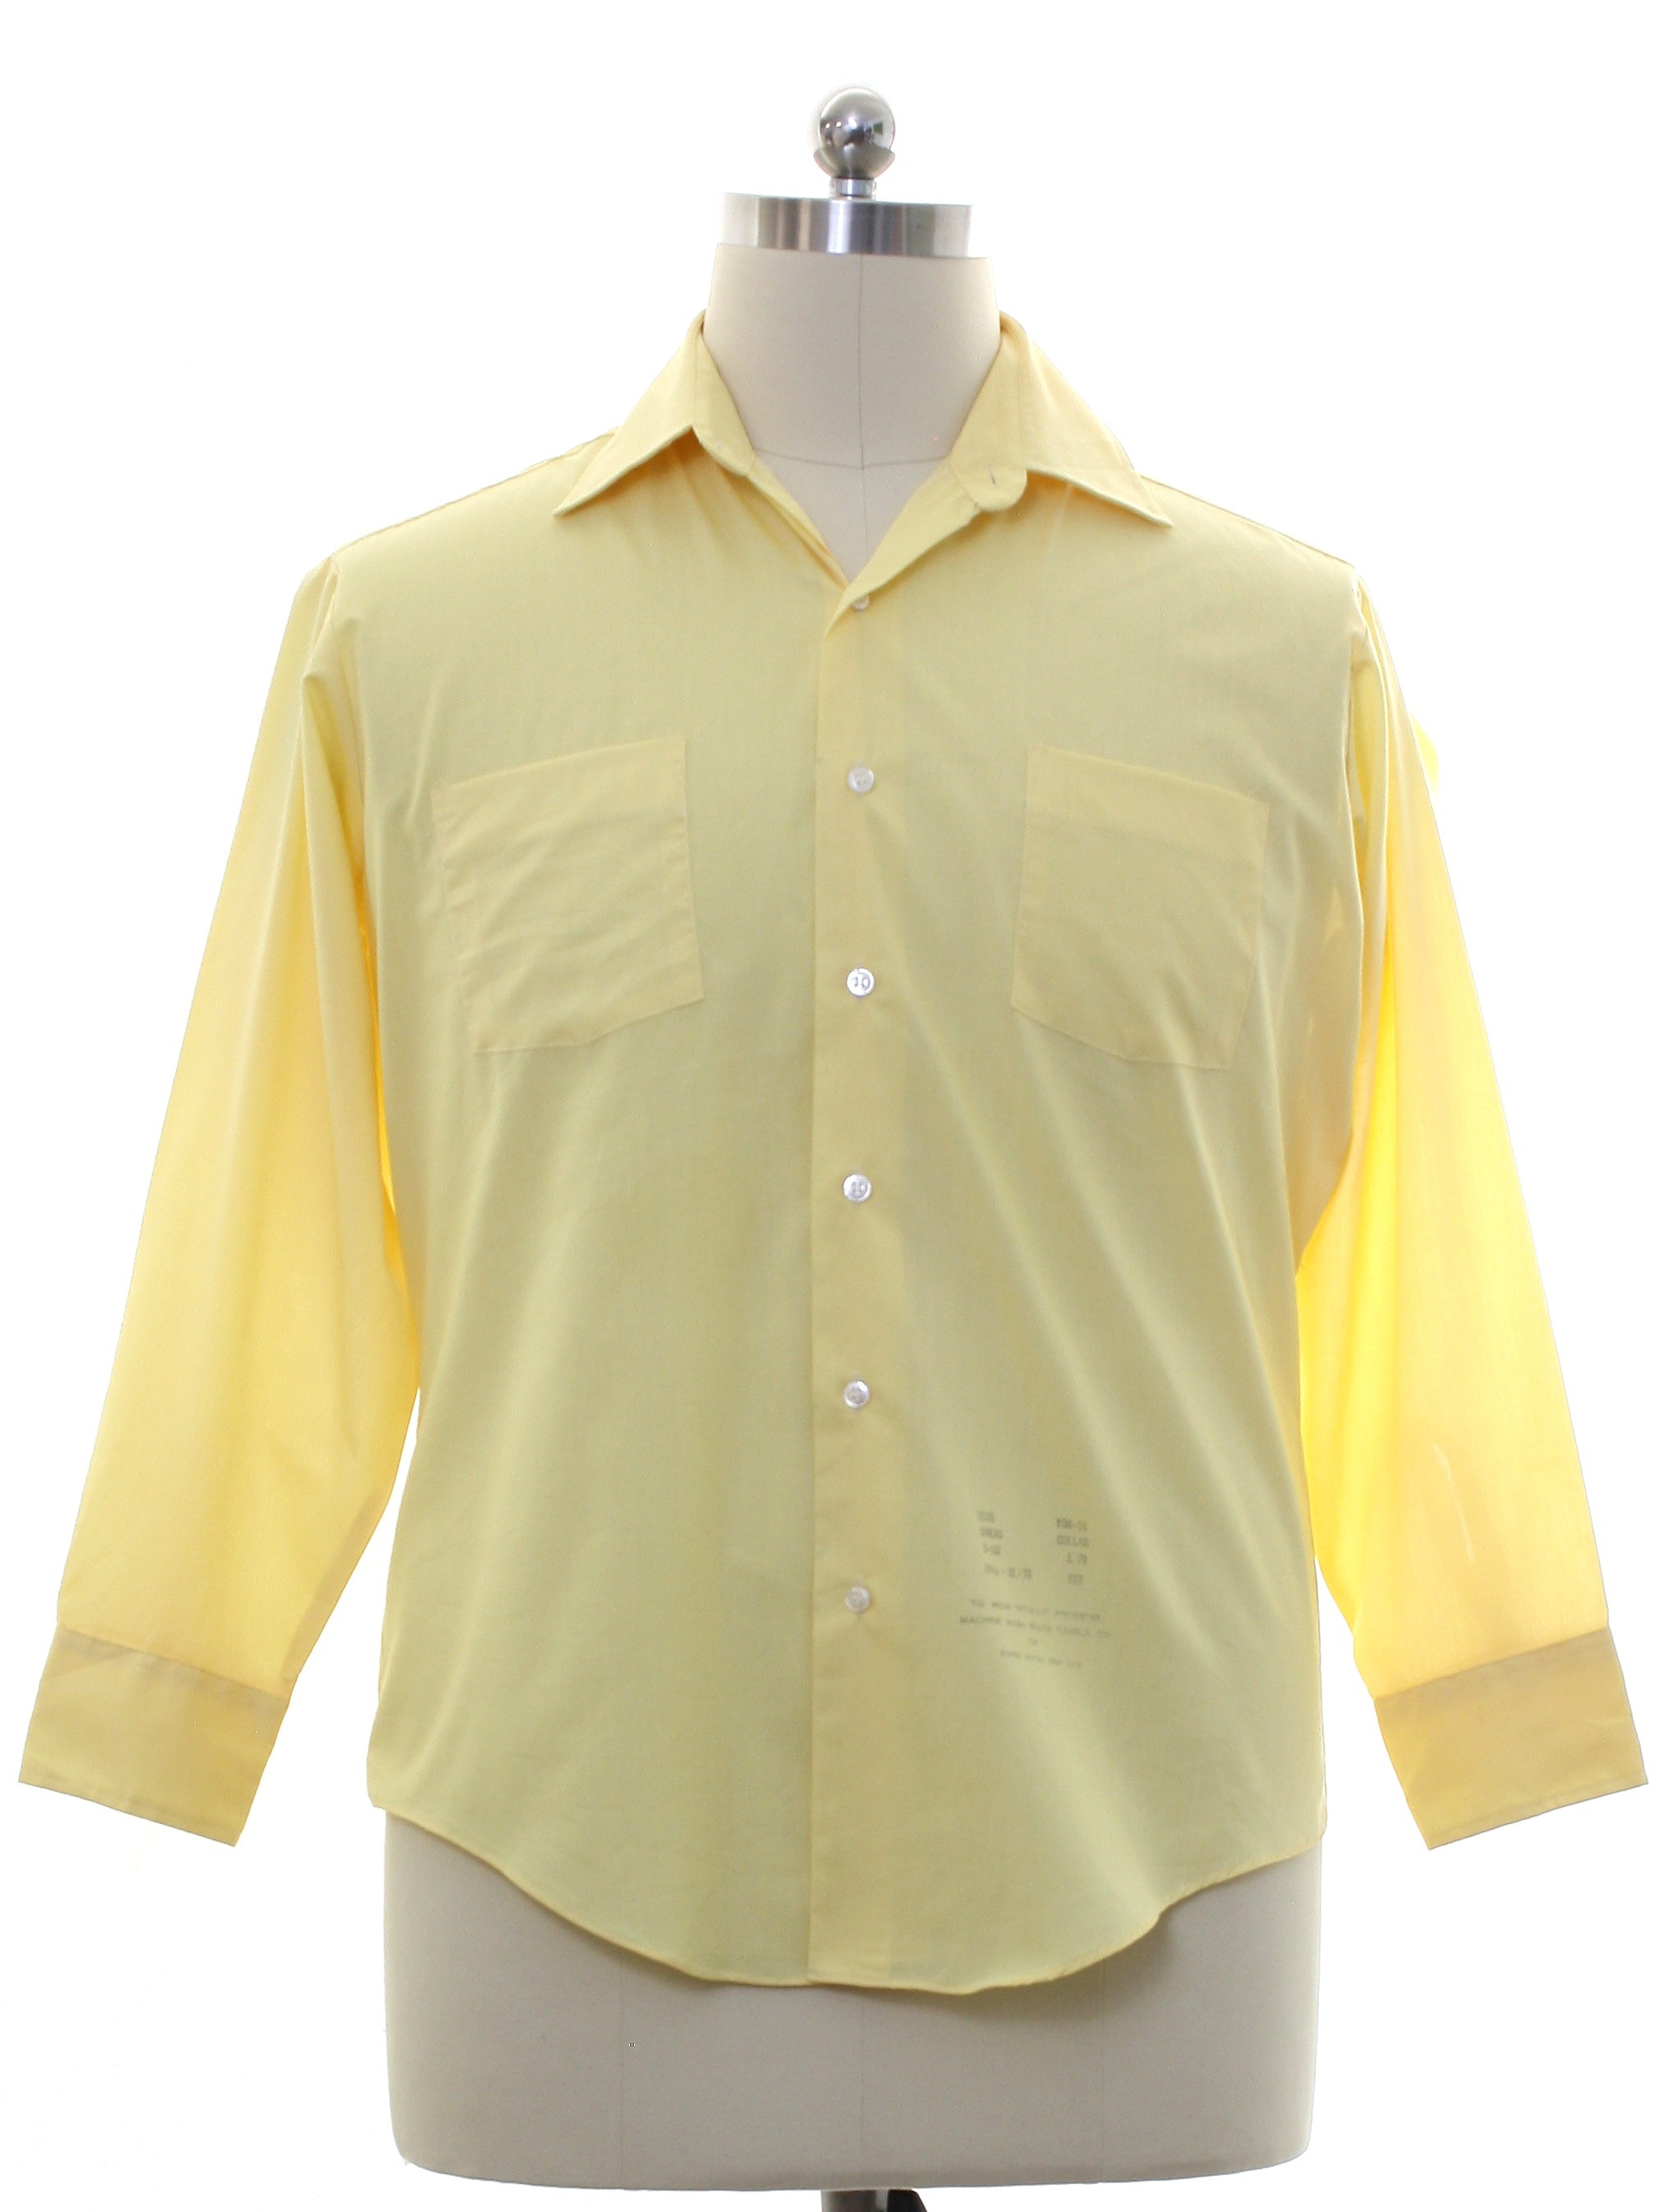 1960's Vintage Sears Shirt: 60s style (made in 70s) - Sears- Mens ...